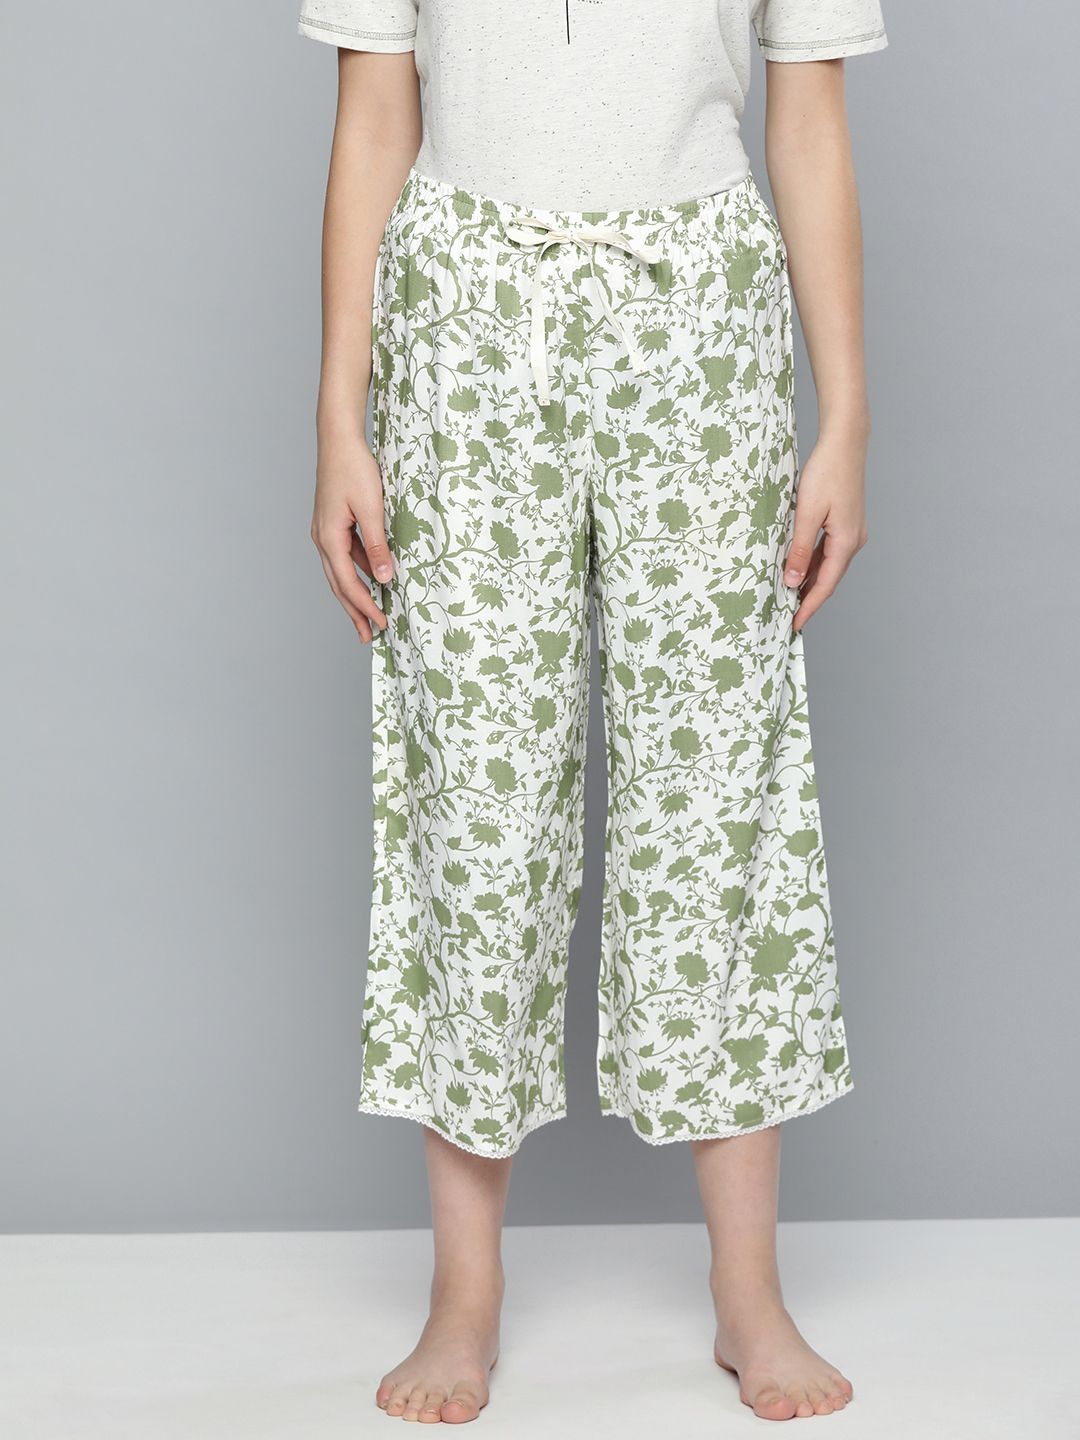 Chemistry Woman's Green and White Floral Printed Crop Lounge Pants Price in India